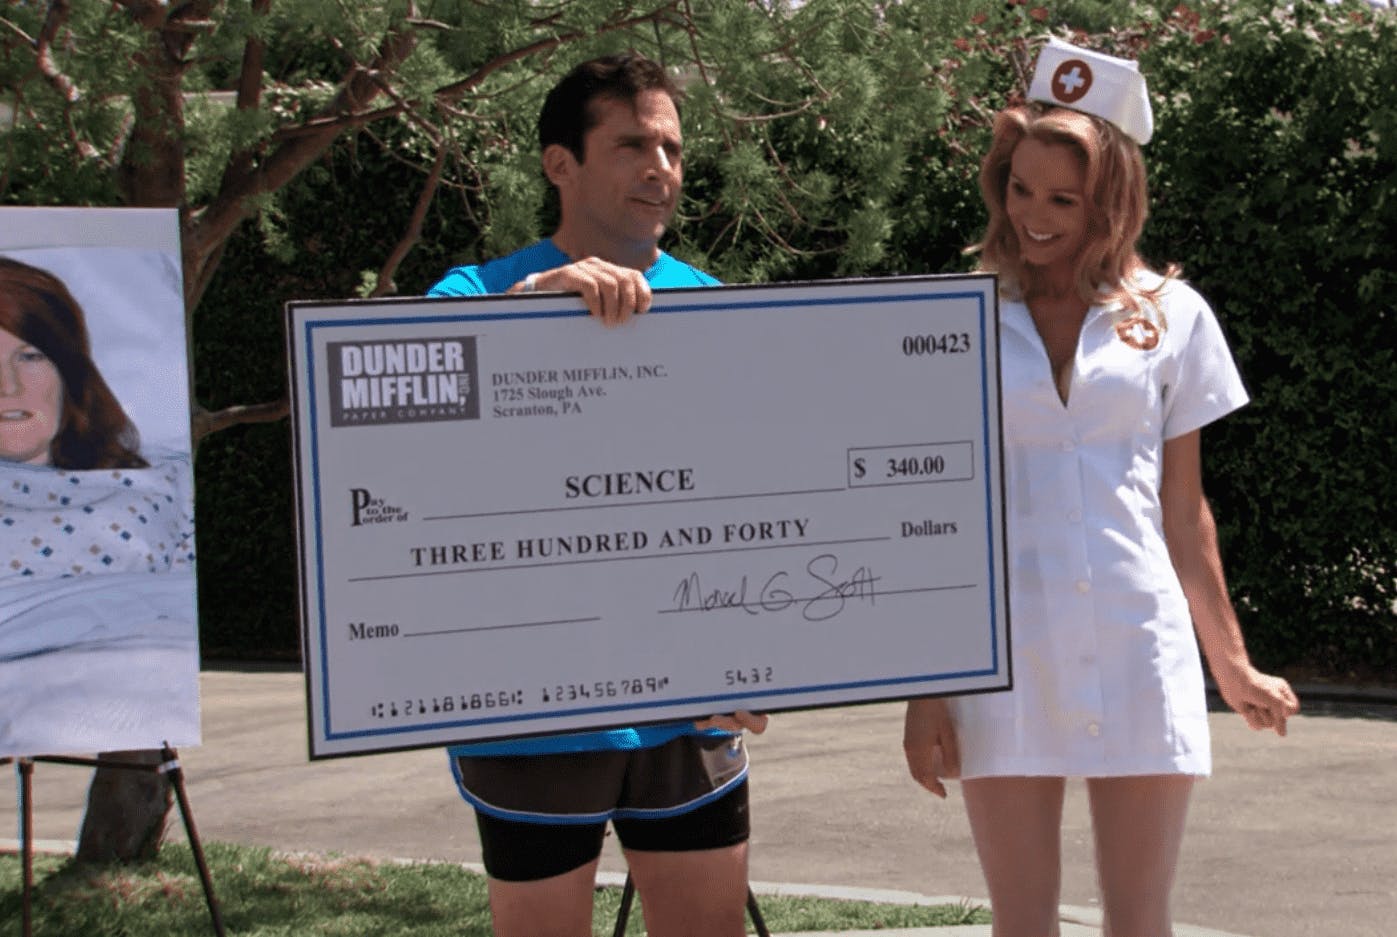 Michael Scott from The Office giving cheque to a stripper